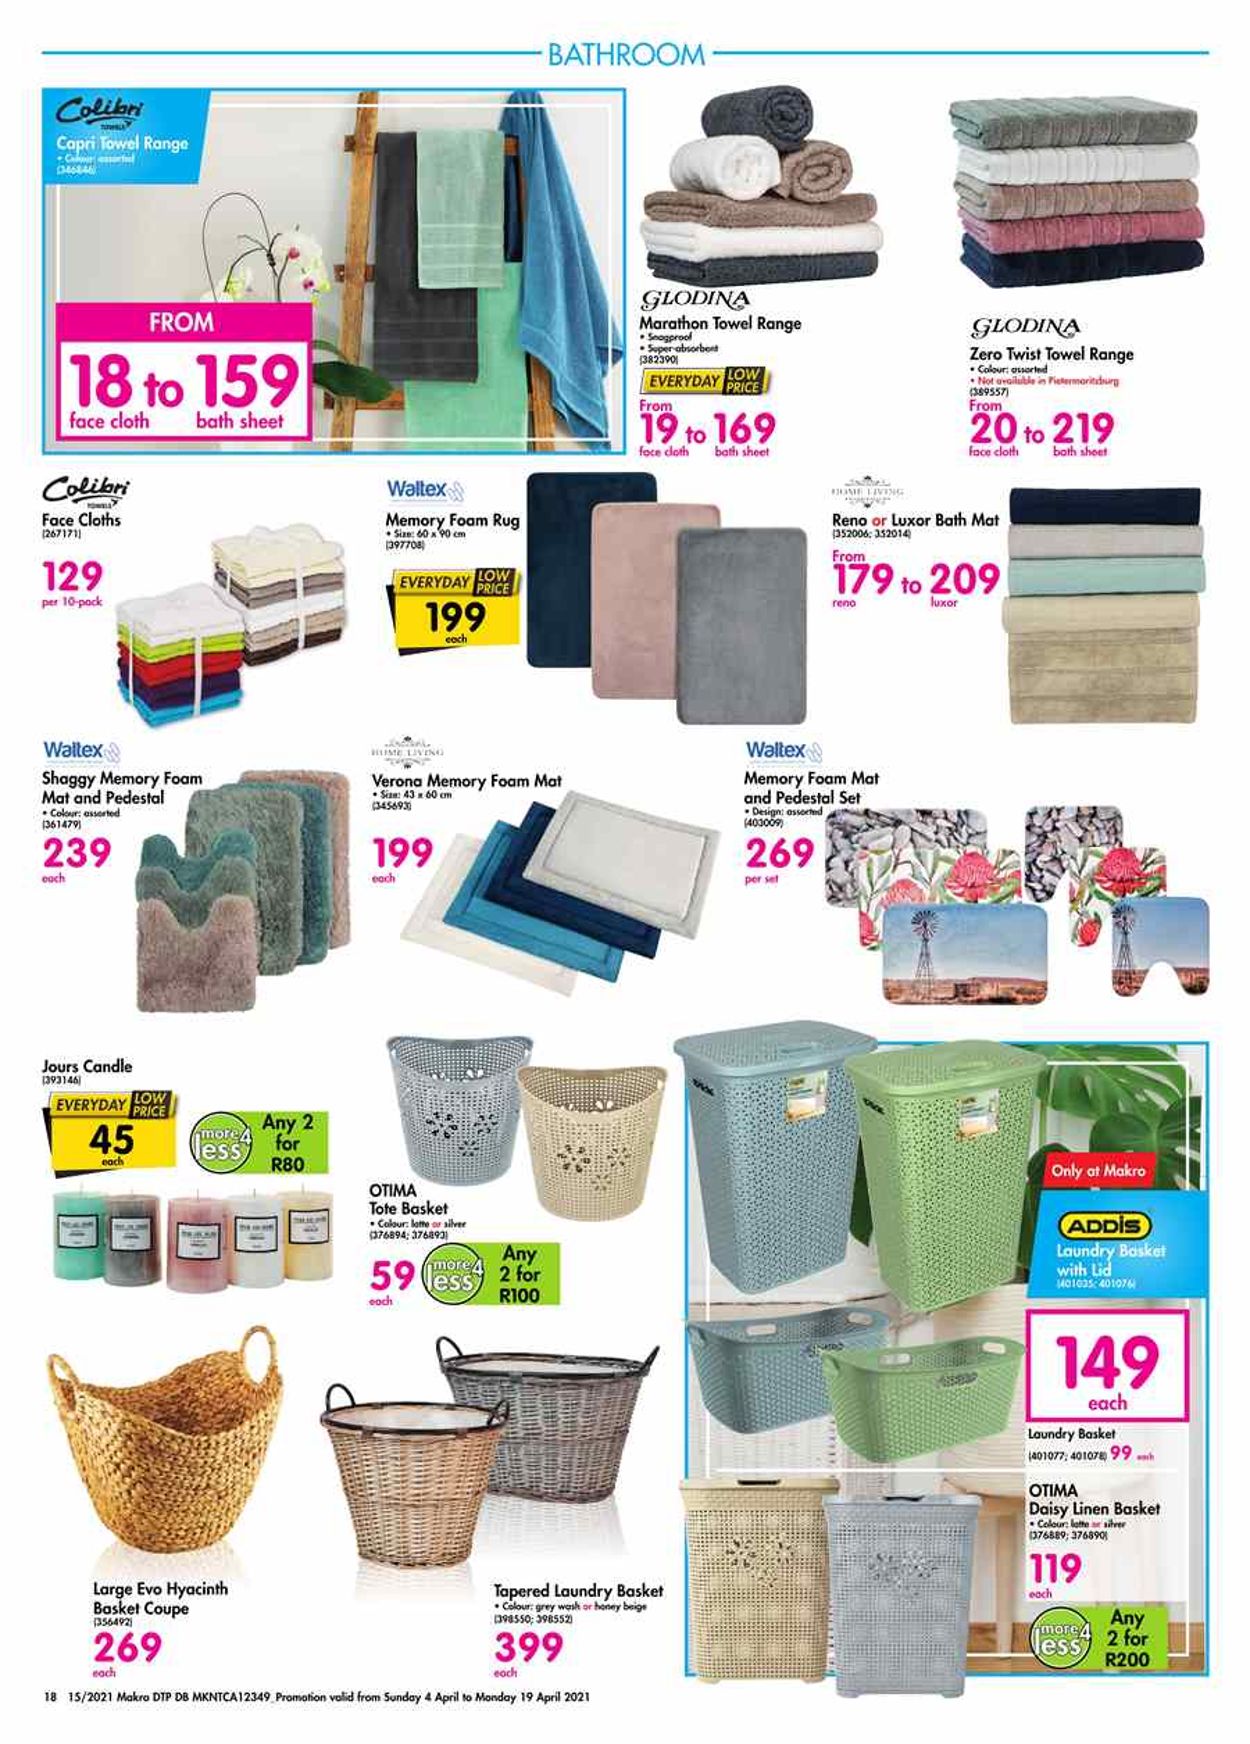 Makro Catalogue from 2021/04/04